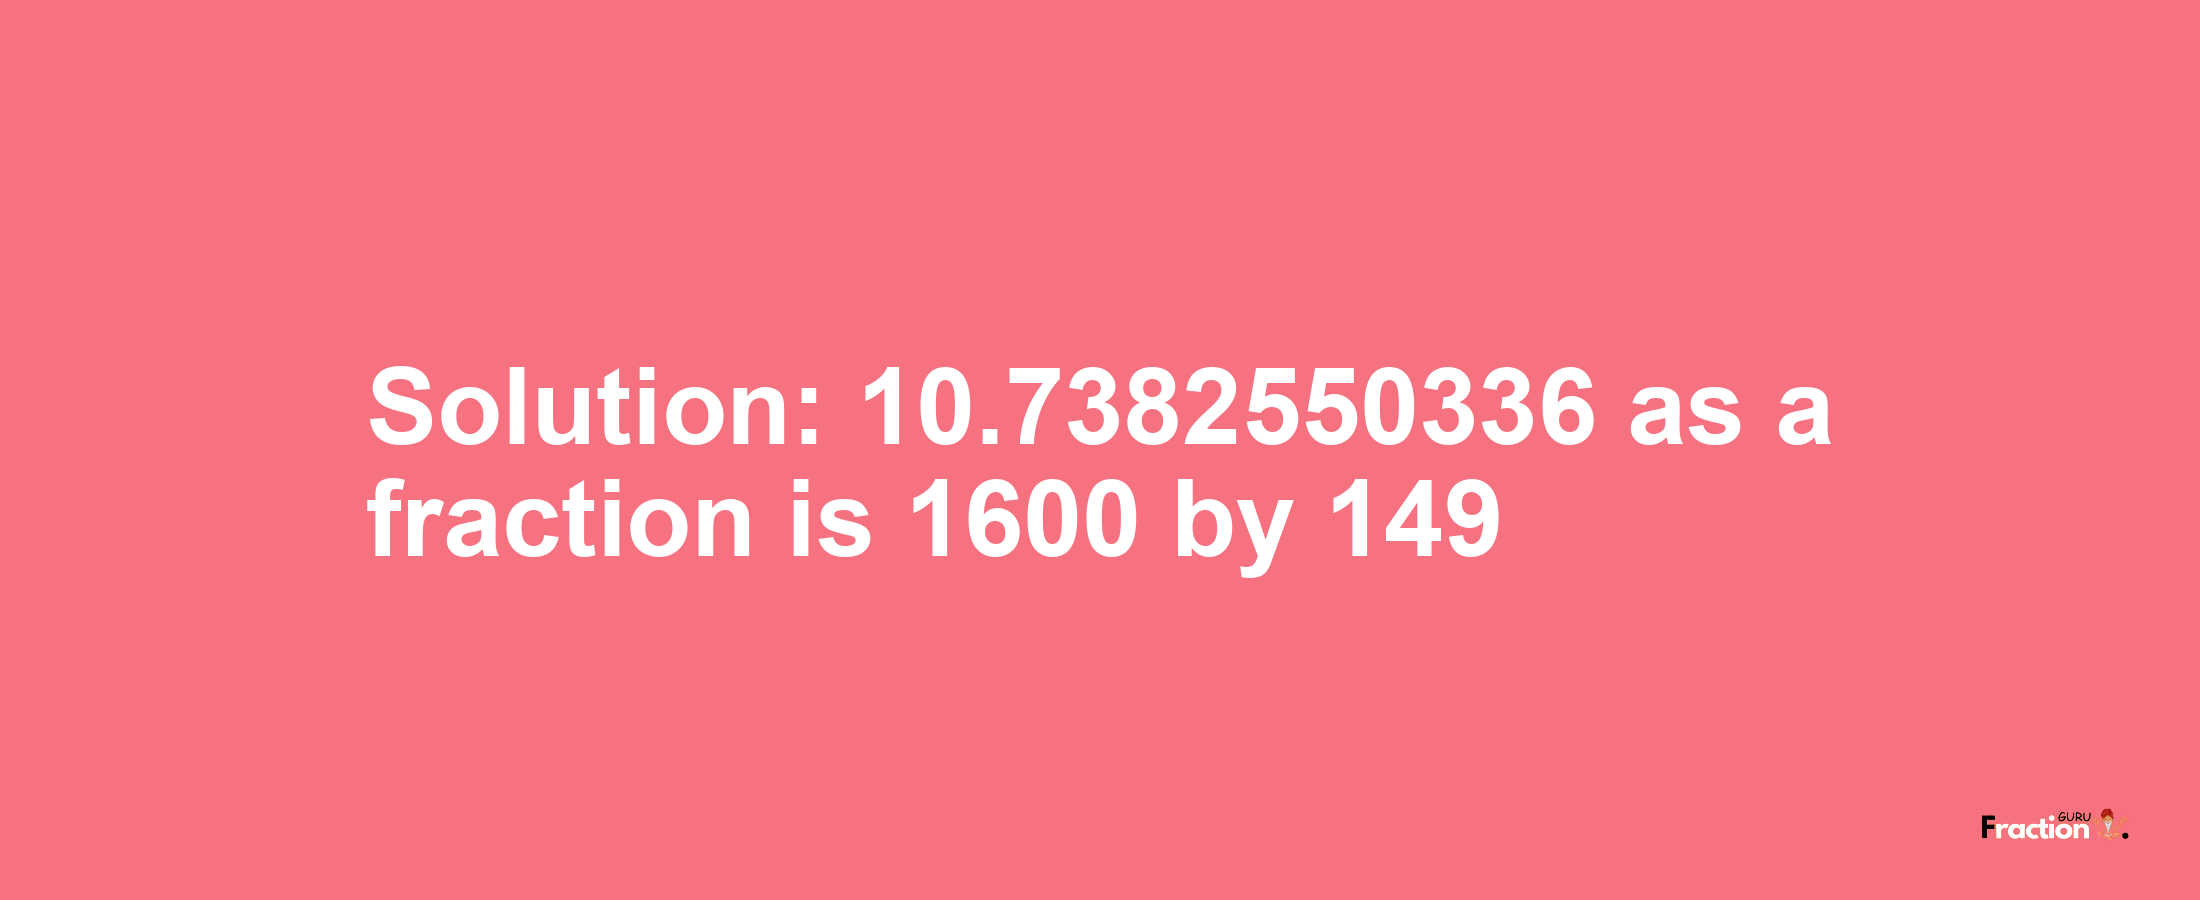 Solution:10.7382550336 as a fraction is 1600/149